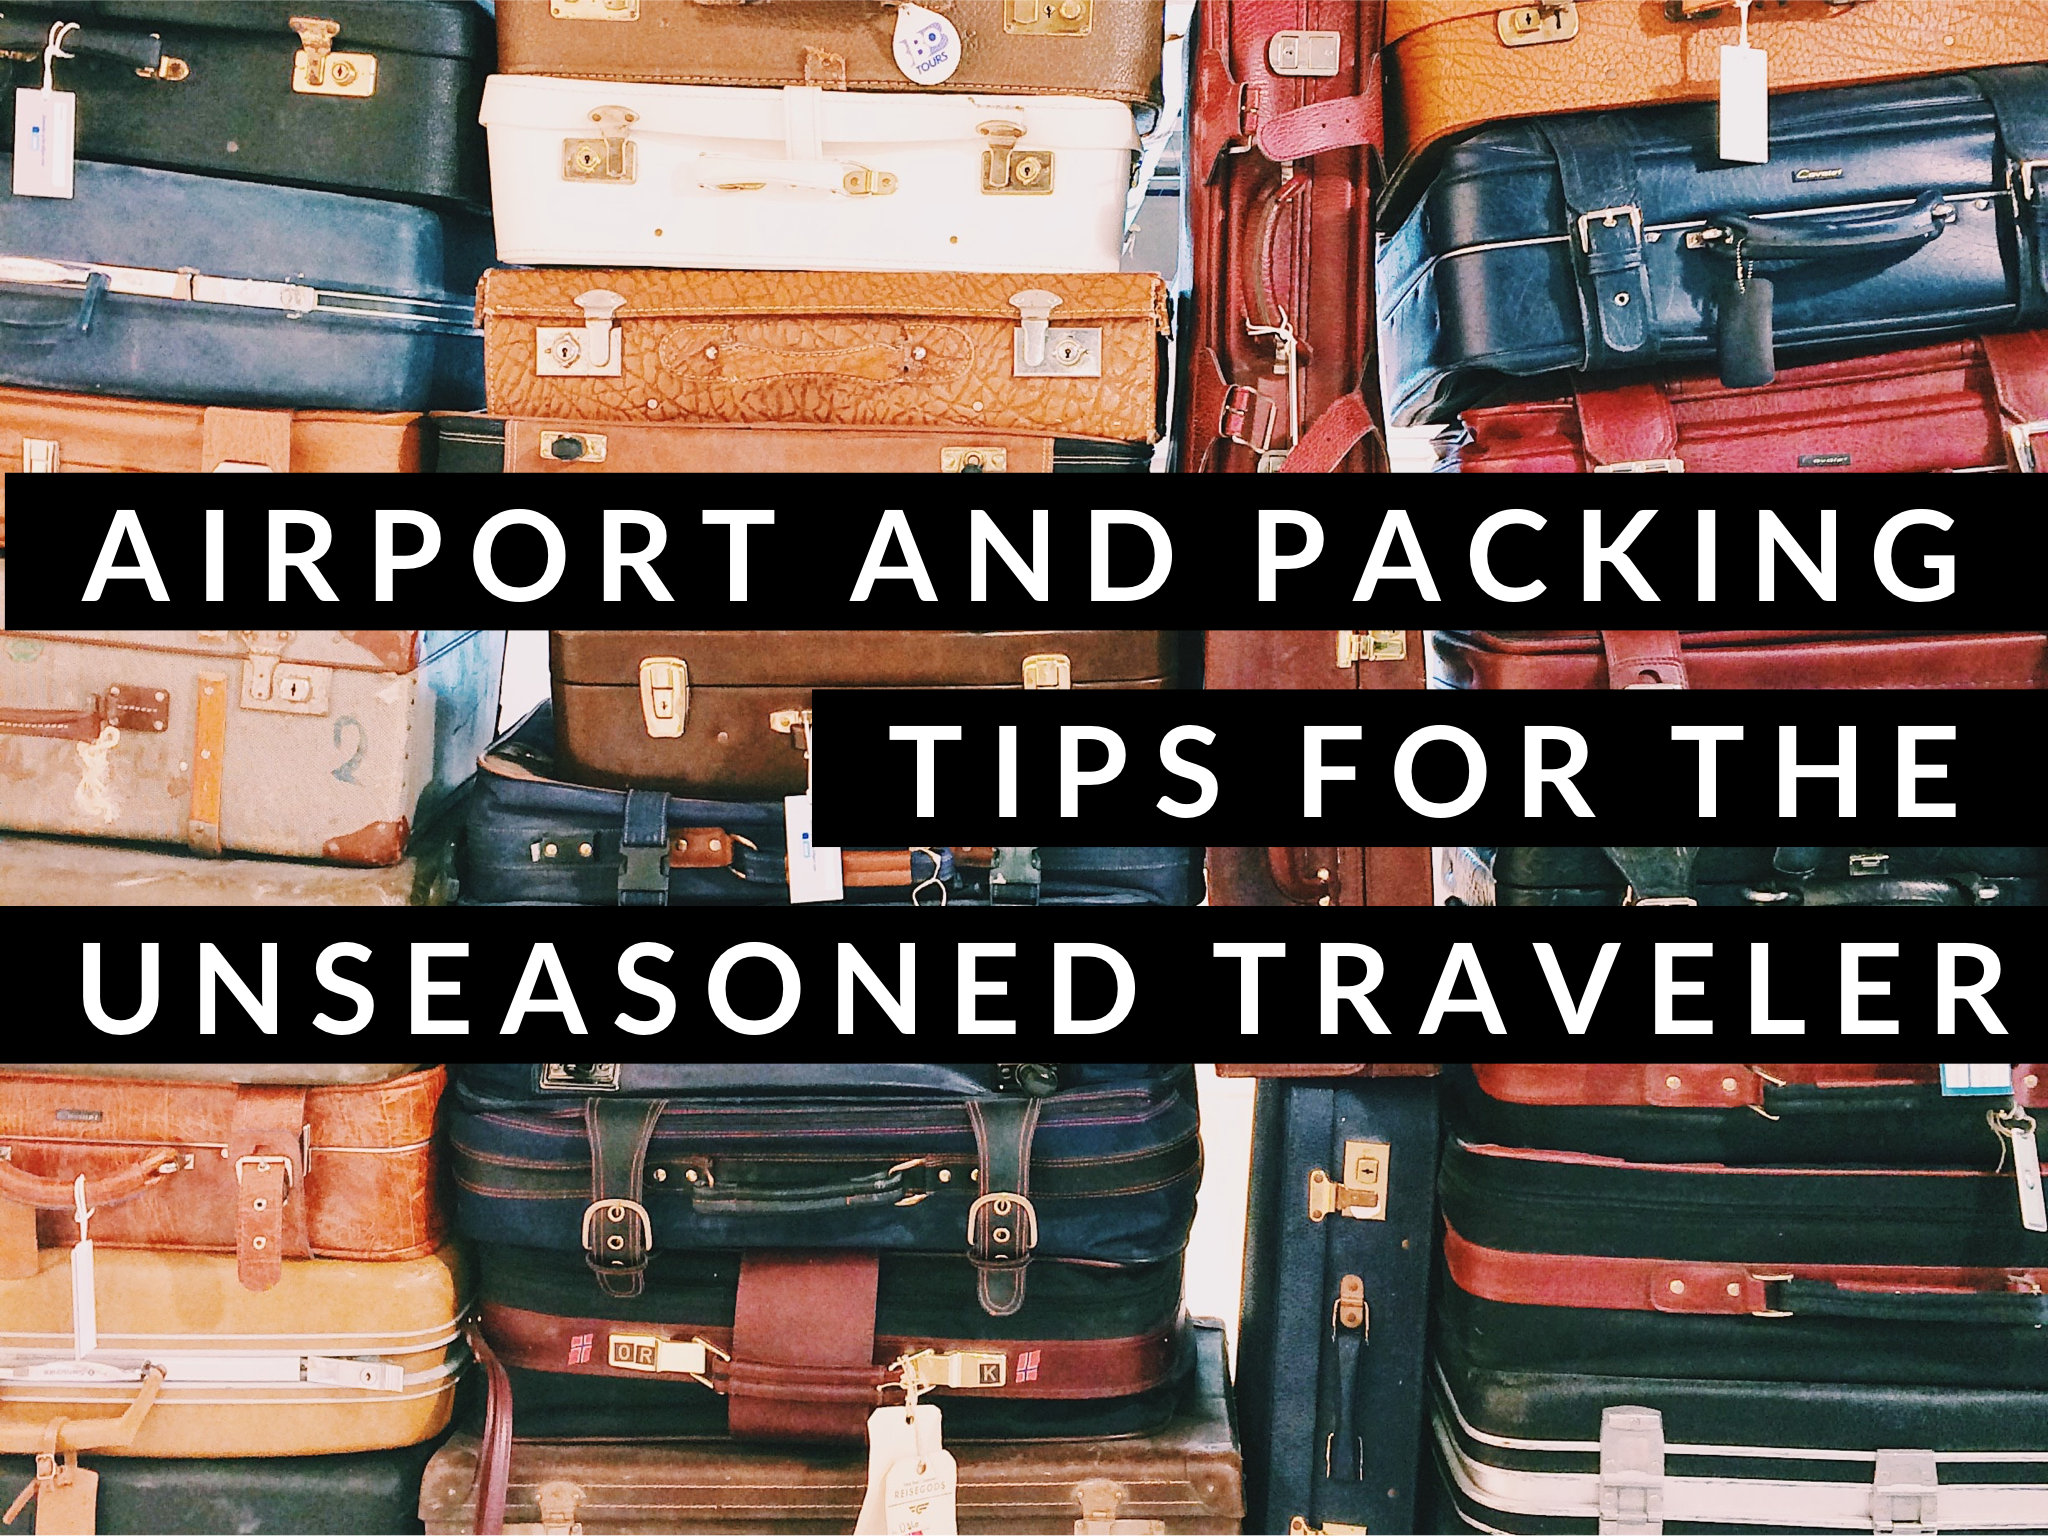 Airport and Packing Tips for the unseasoned traveler